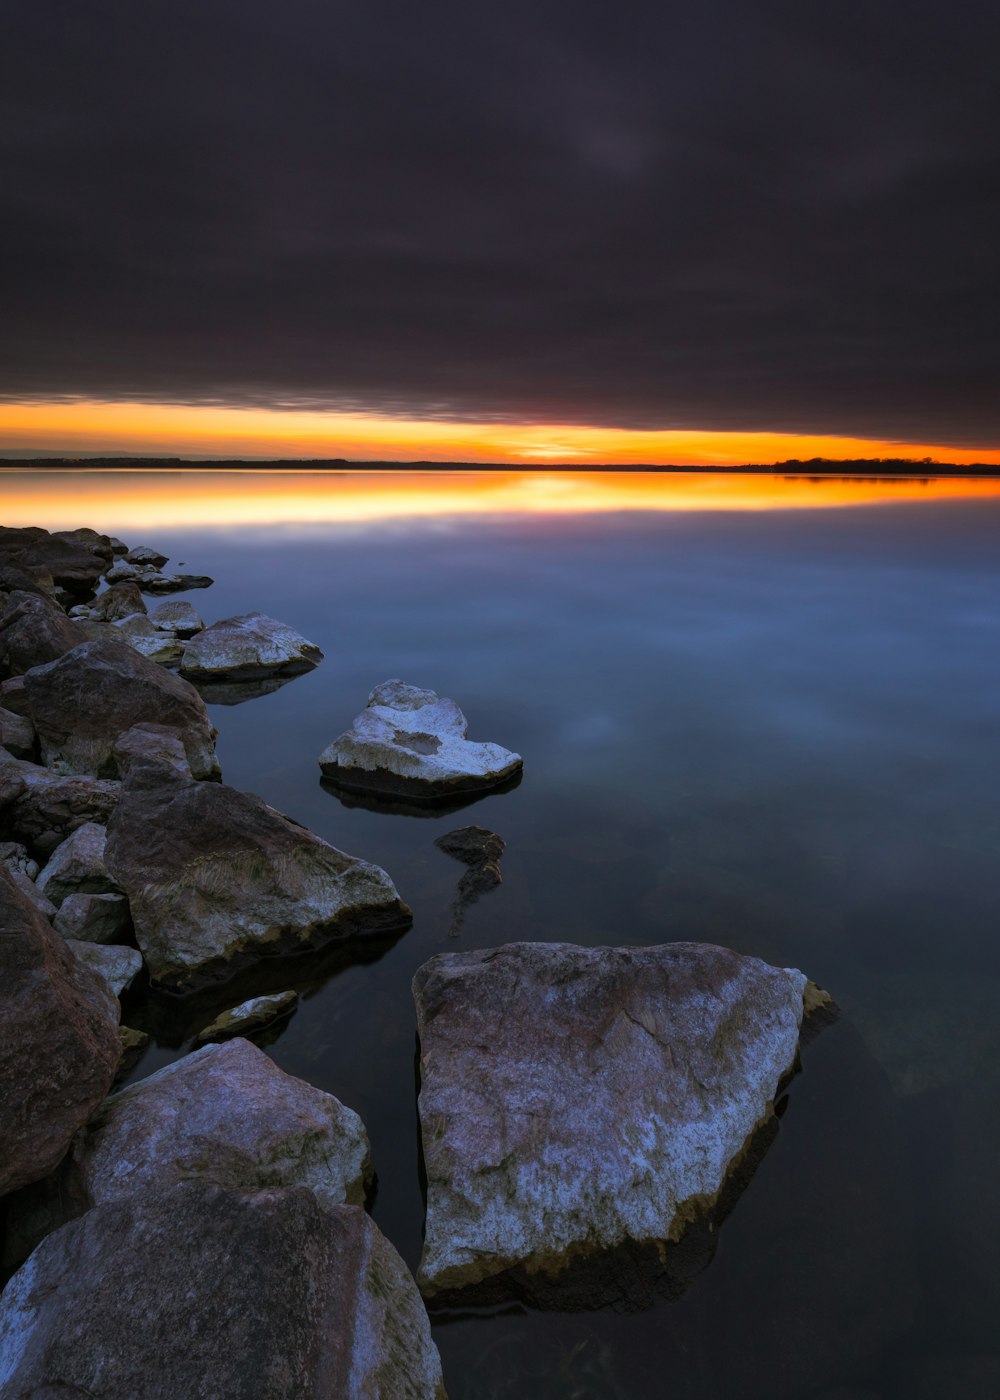 a long exposure photo of a sunset over a body of water